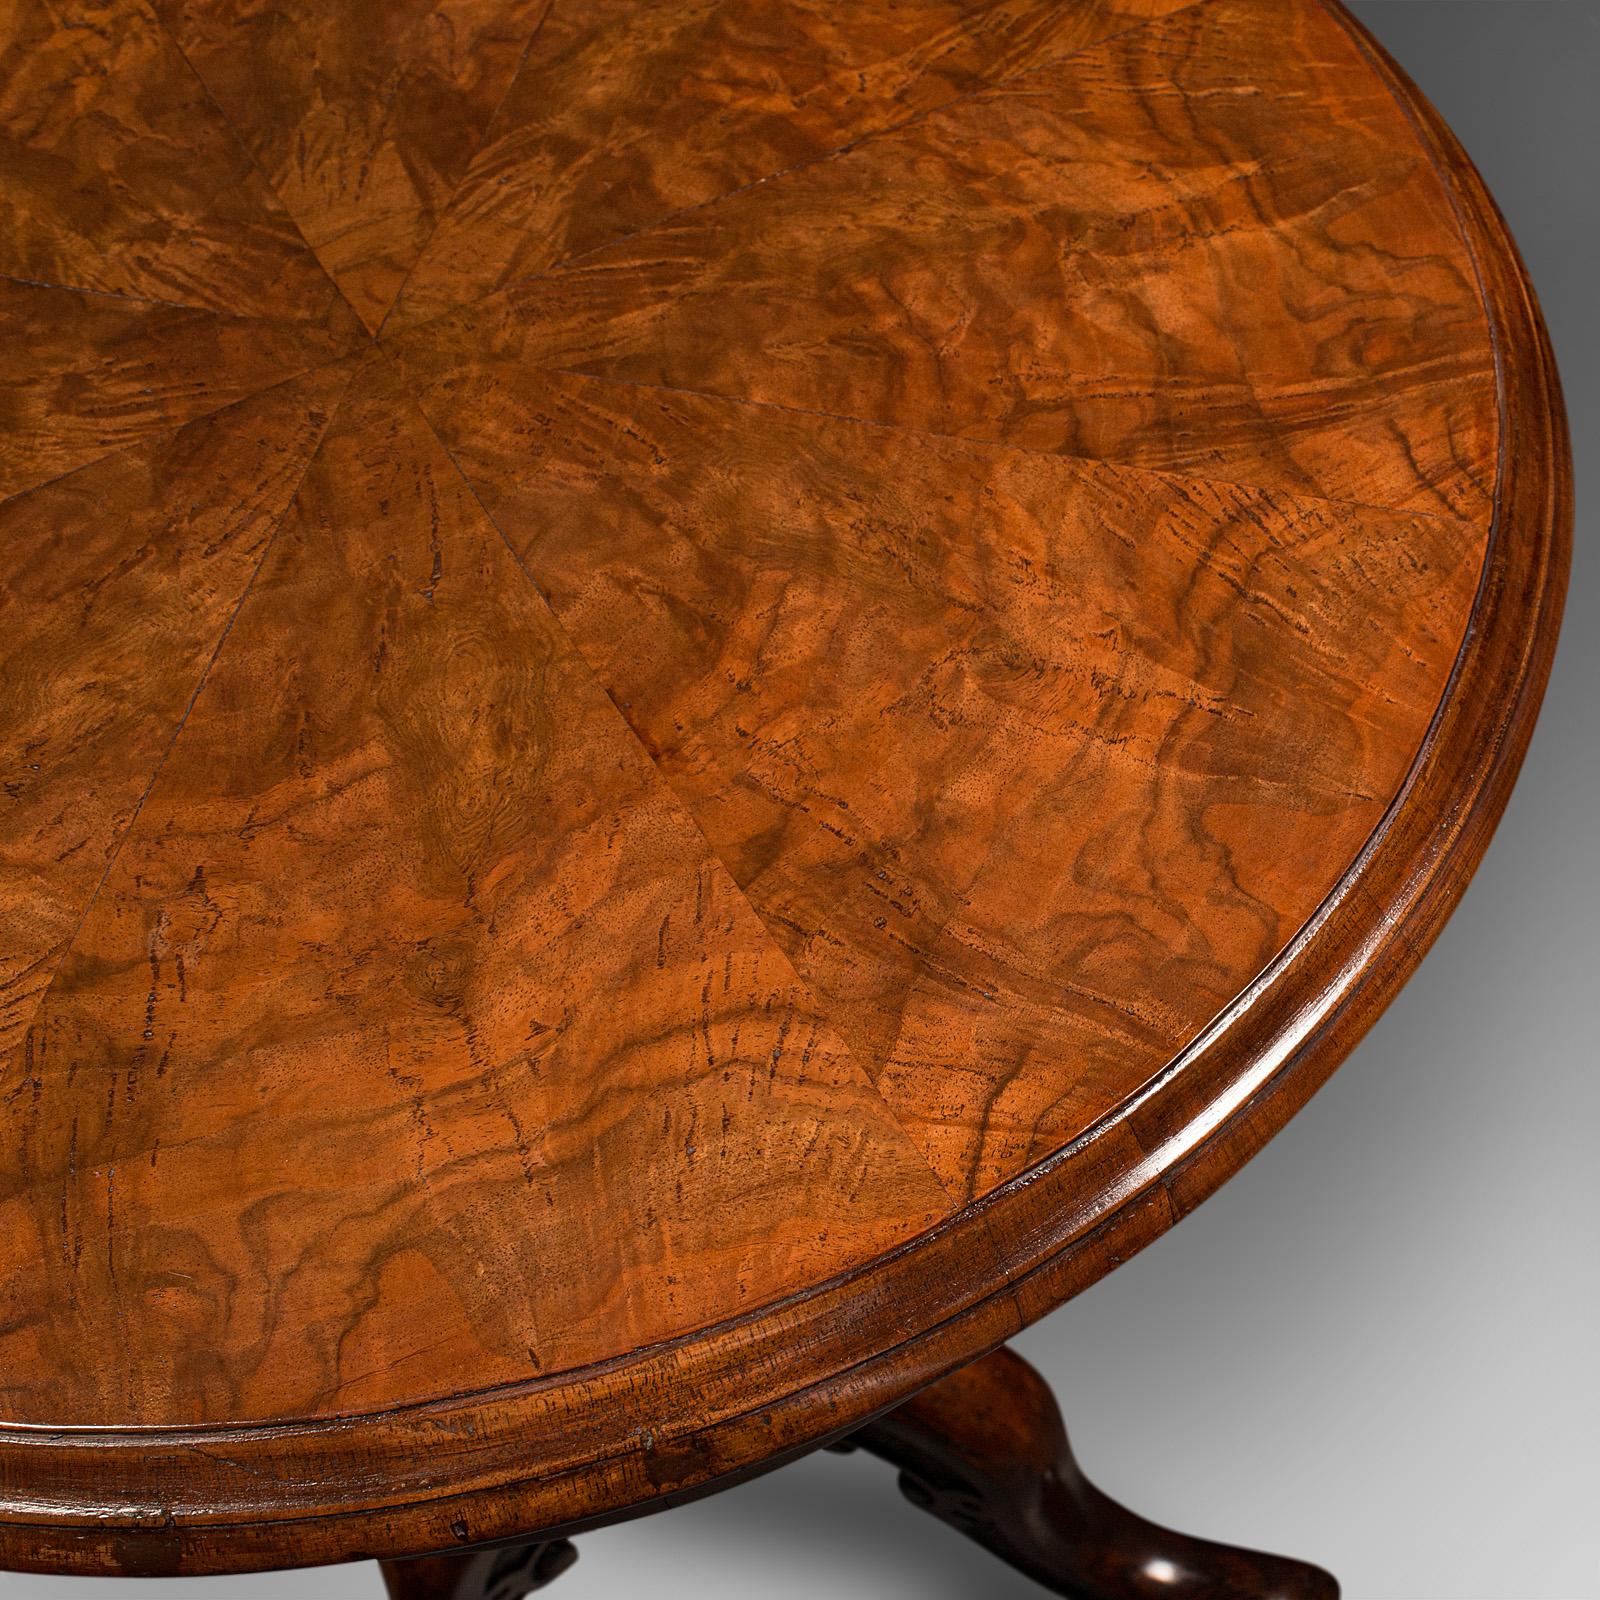 Antique Lamp Table, English Burr Walnut, Decorative, Occasional, Early Victorian For Sale 4